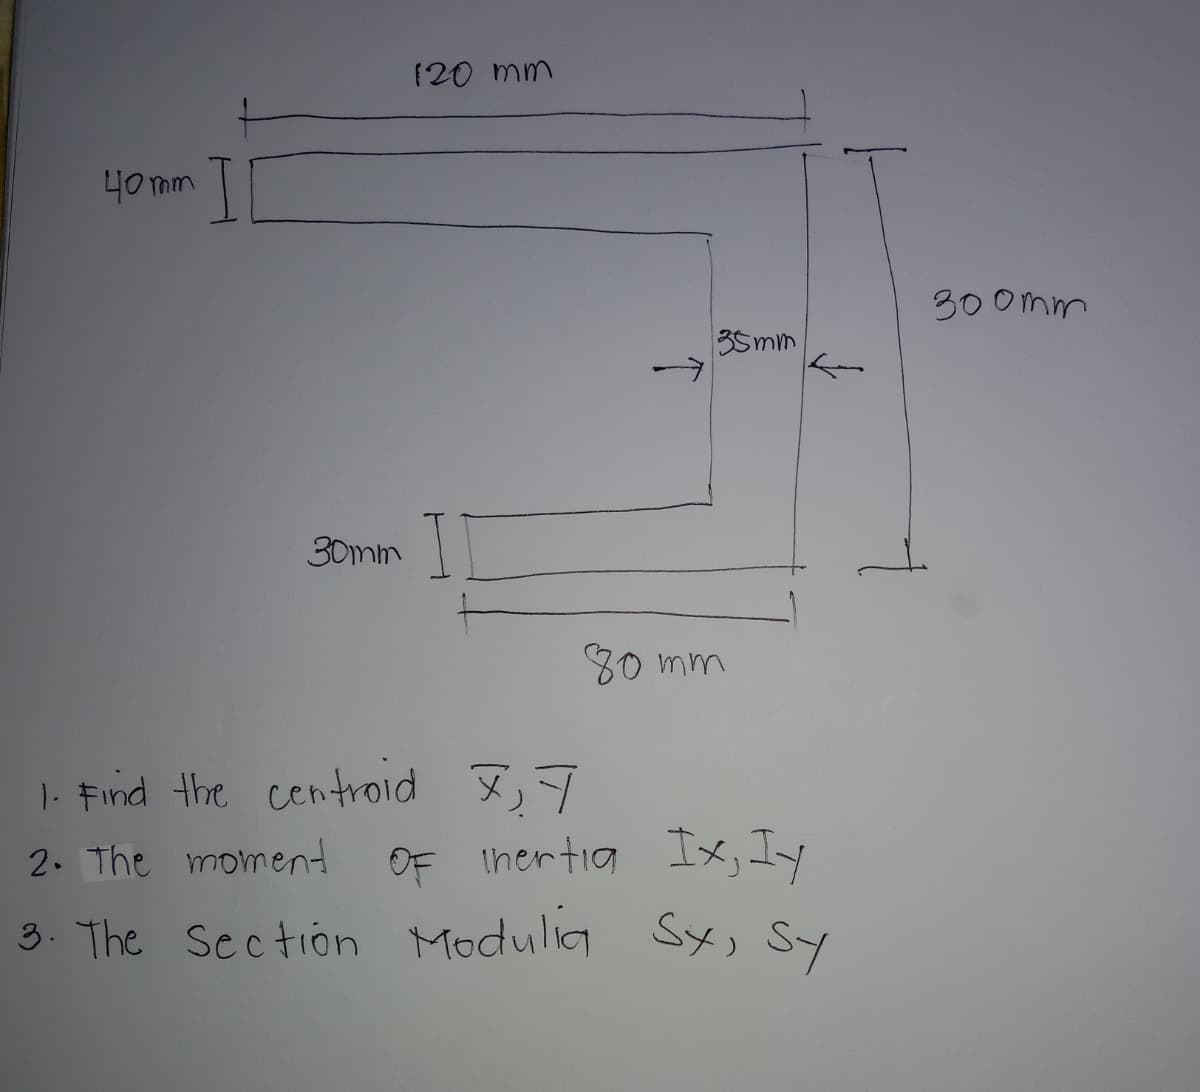 120 mm
40 mm
30 0mm
35mm
30mm
80 mm
|- Find the centroid ,7
2. The moment
OF Ihertia Ix, Iy
3. The Section Modulig Sx, Sy
SY, SY
